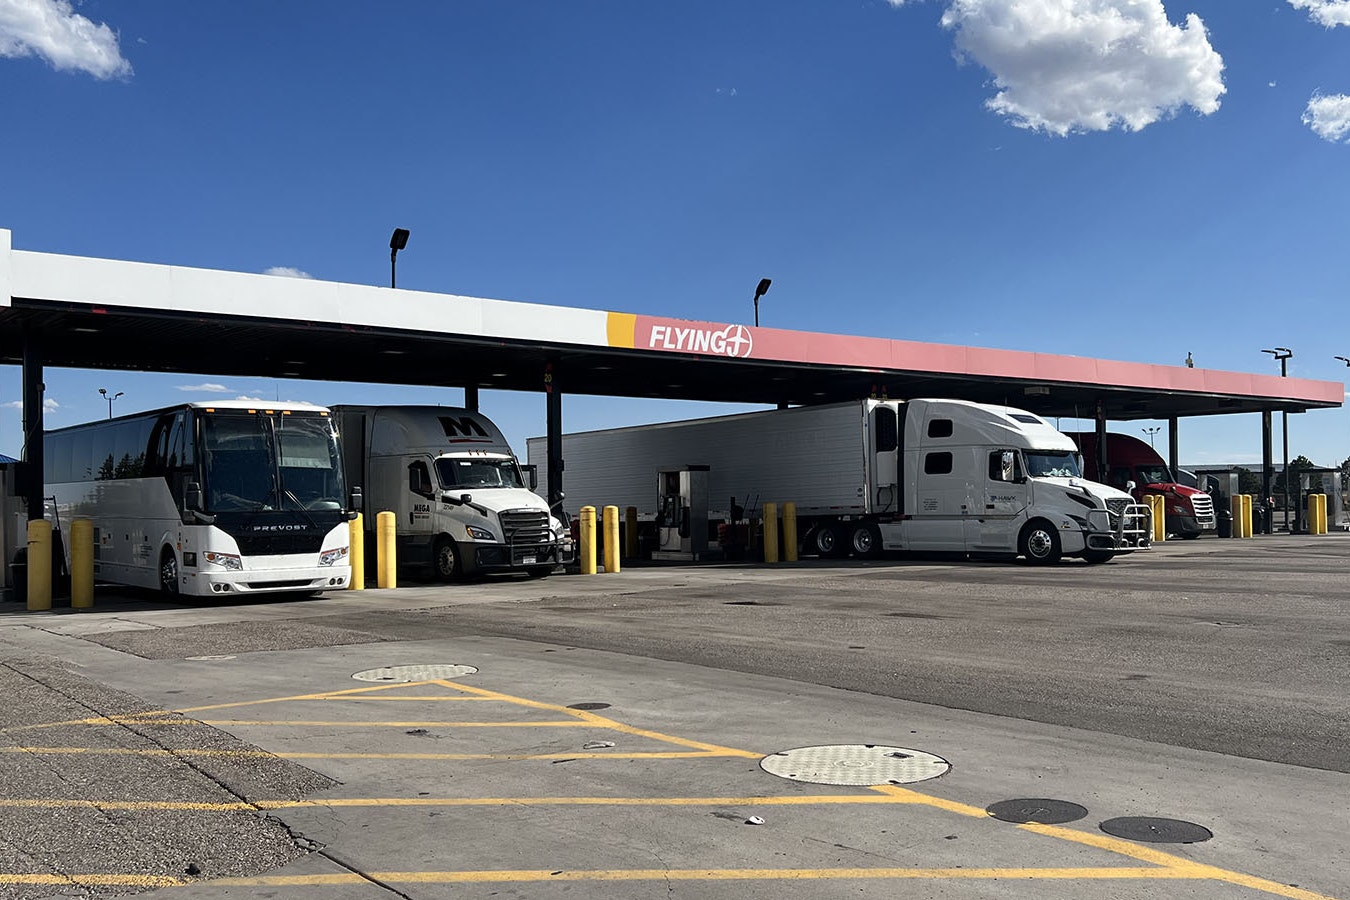 The Flying J truck stop at Exit 7 of Interstate 25 in south Cheyenne is one of the busiest in the area for truckers to fuel up.